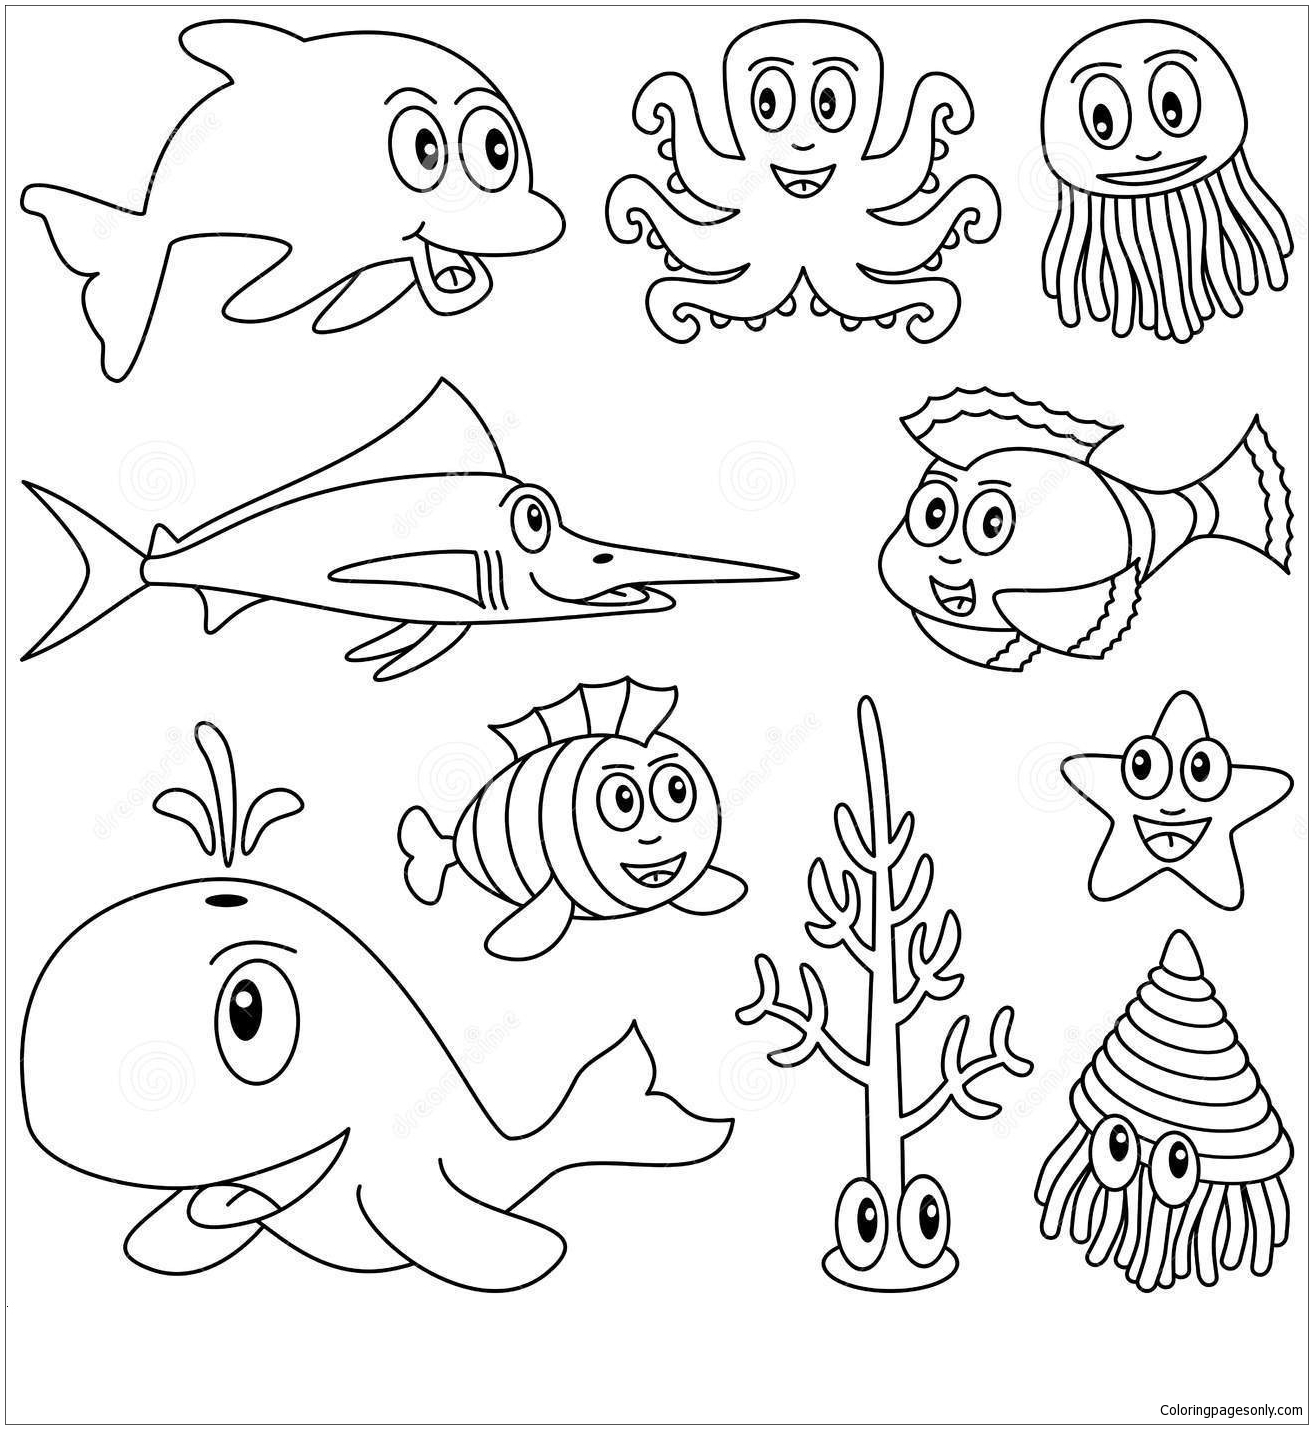 sea-animals-coloring-pages-to-print